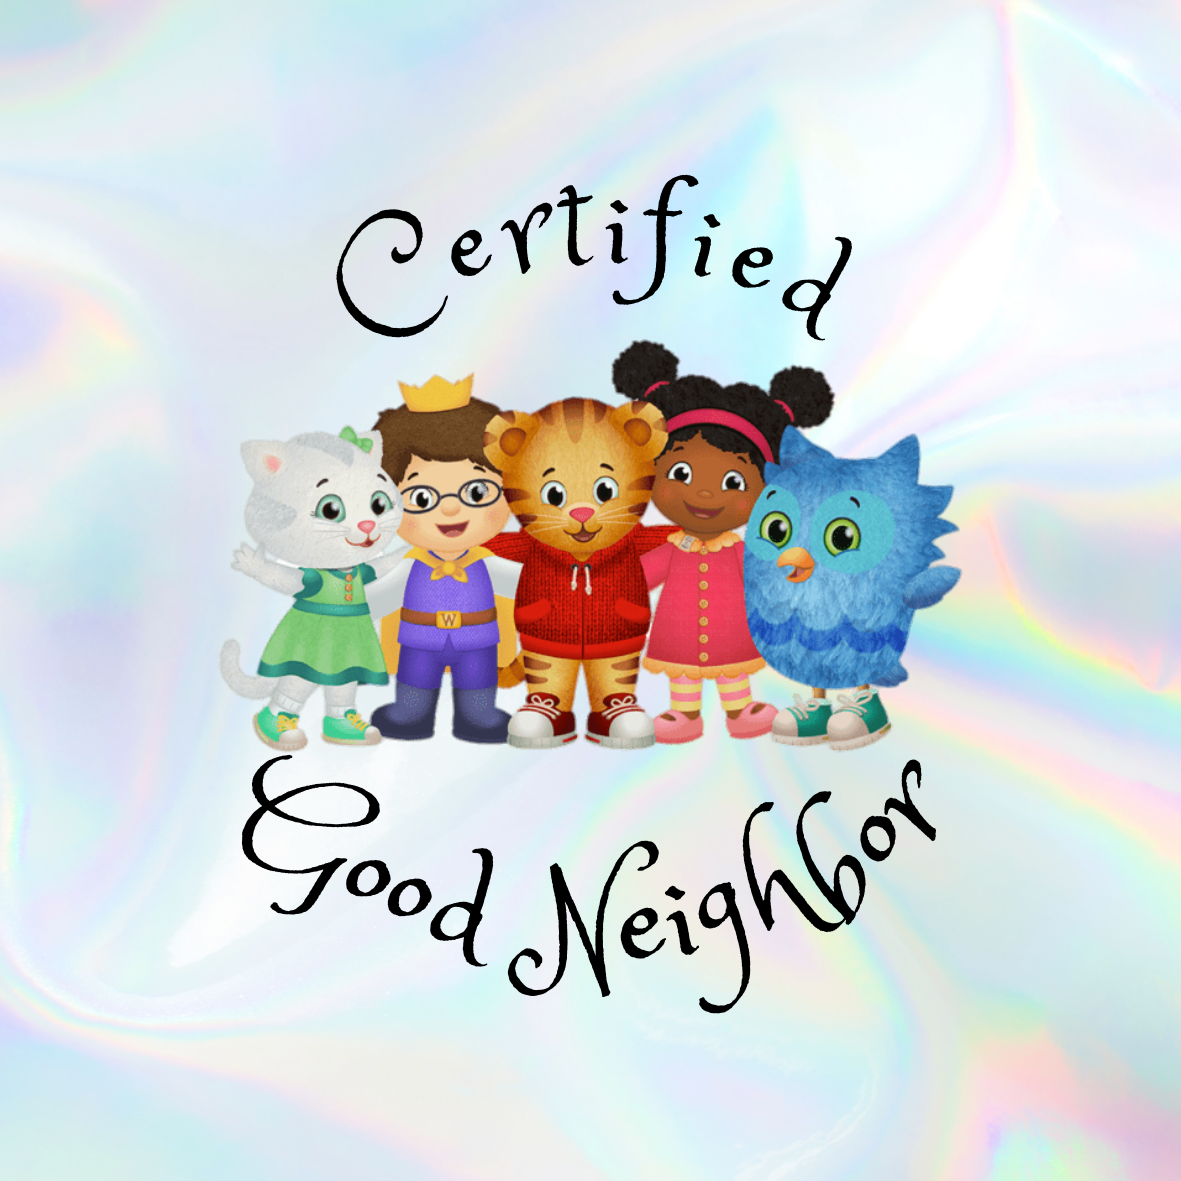 Characters from Daniel Tiger's Neighborhood hug each other surrounded by the text 